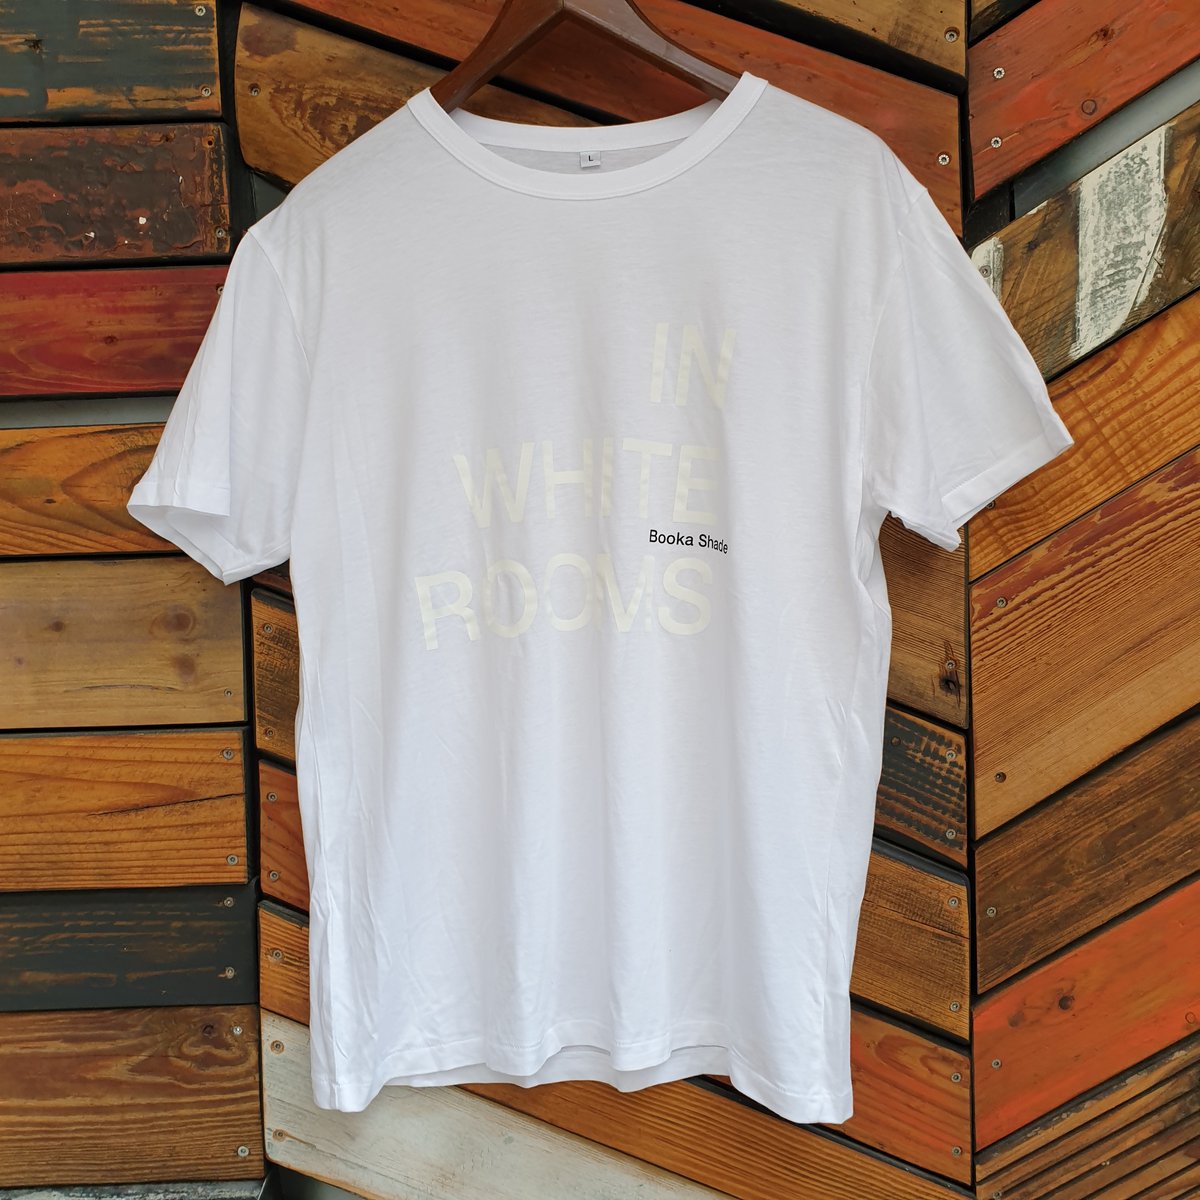 "In White Rooms" Shirt by Booka Shade